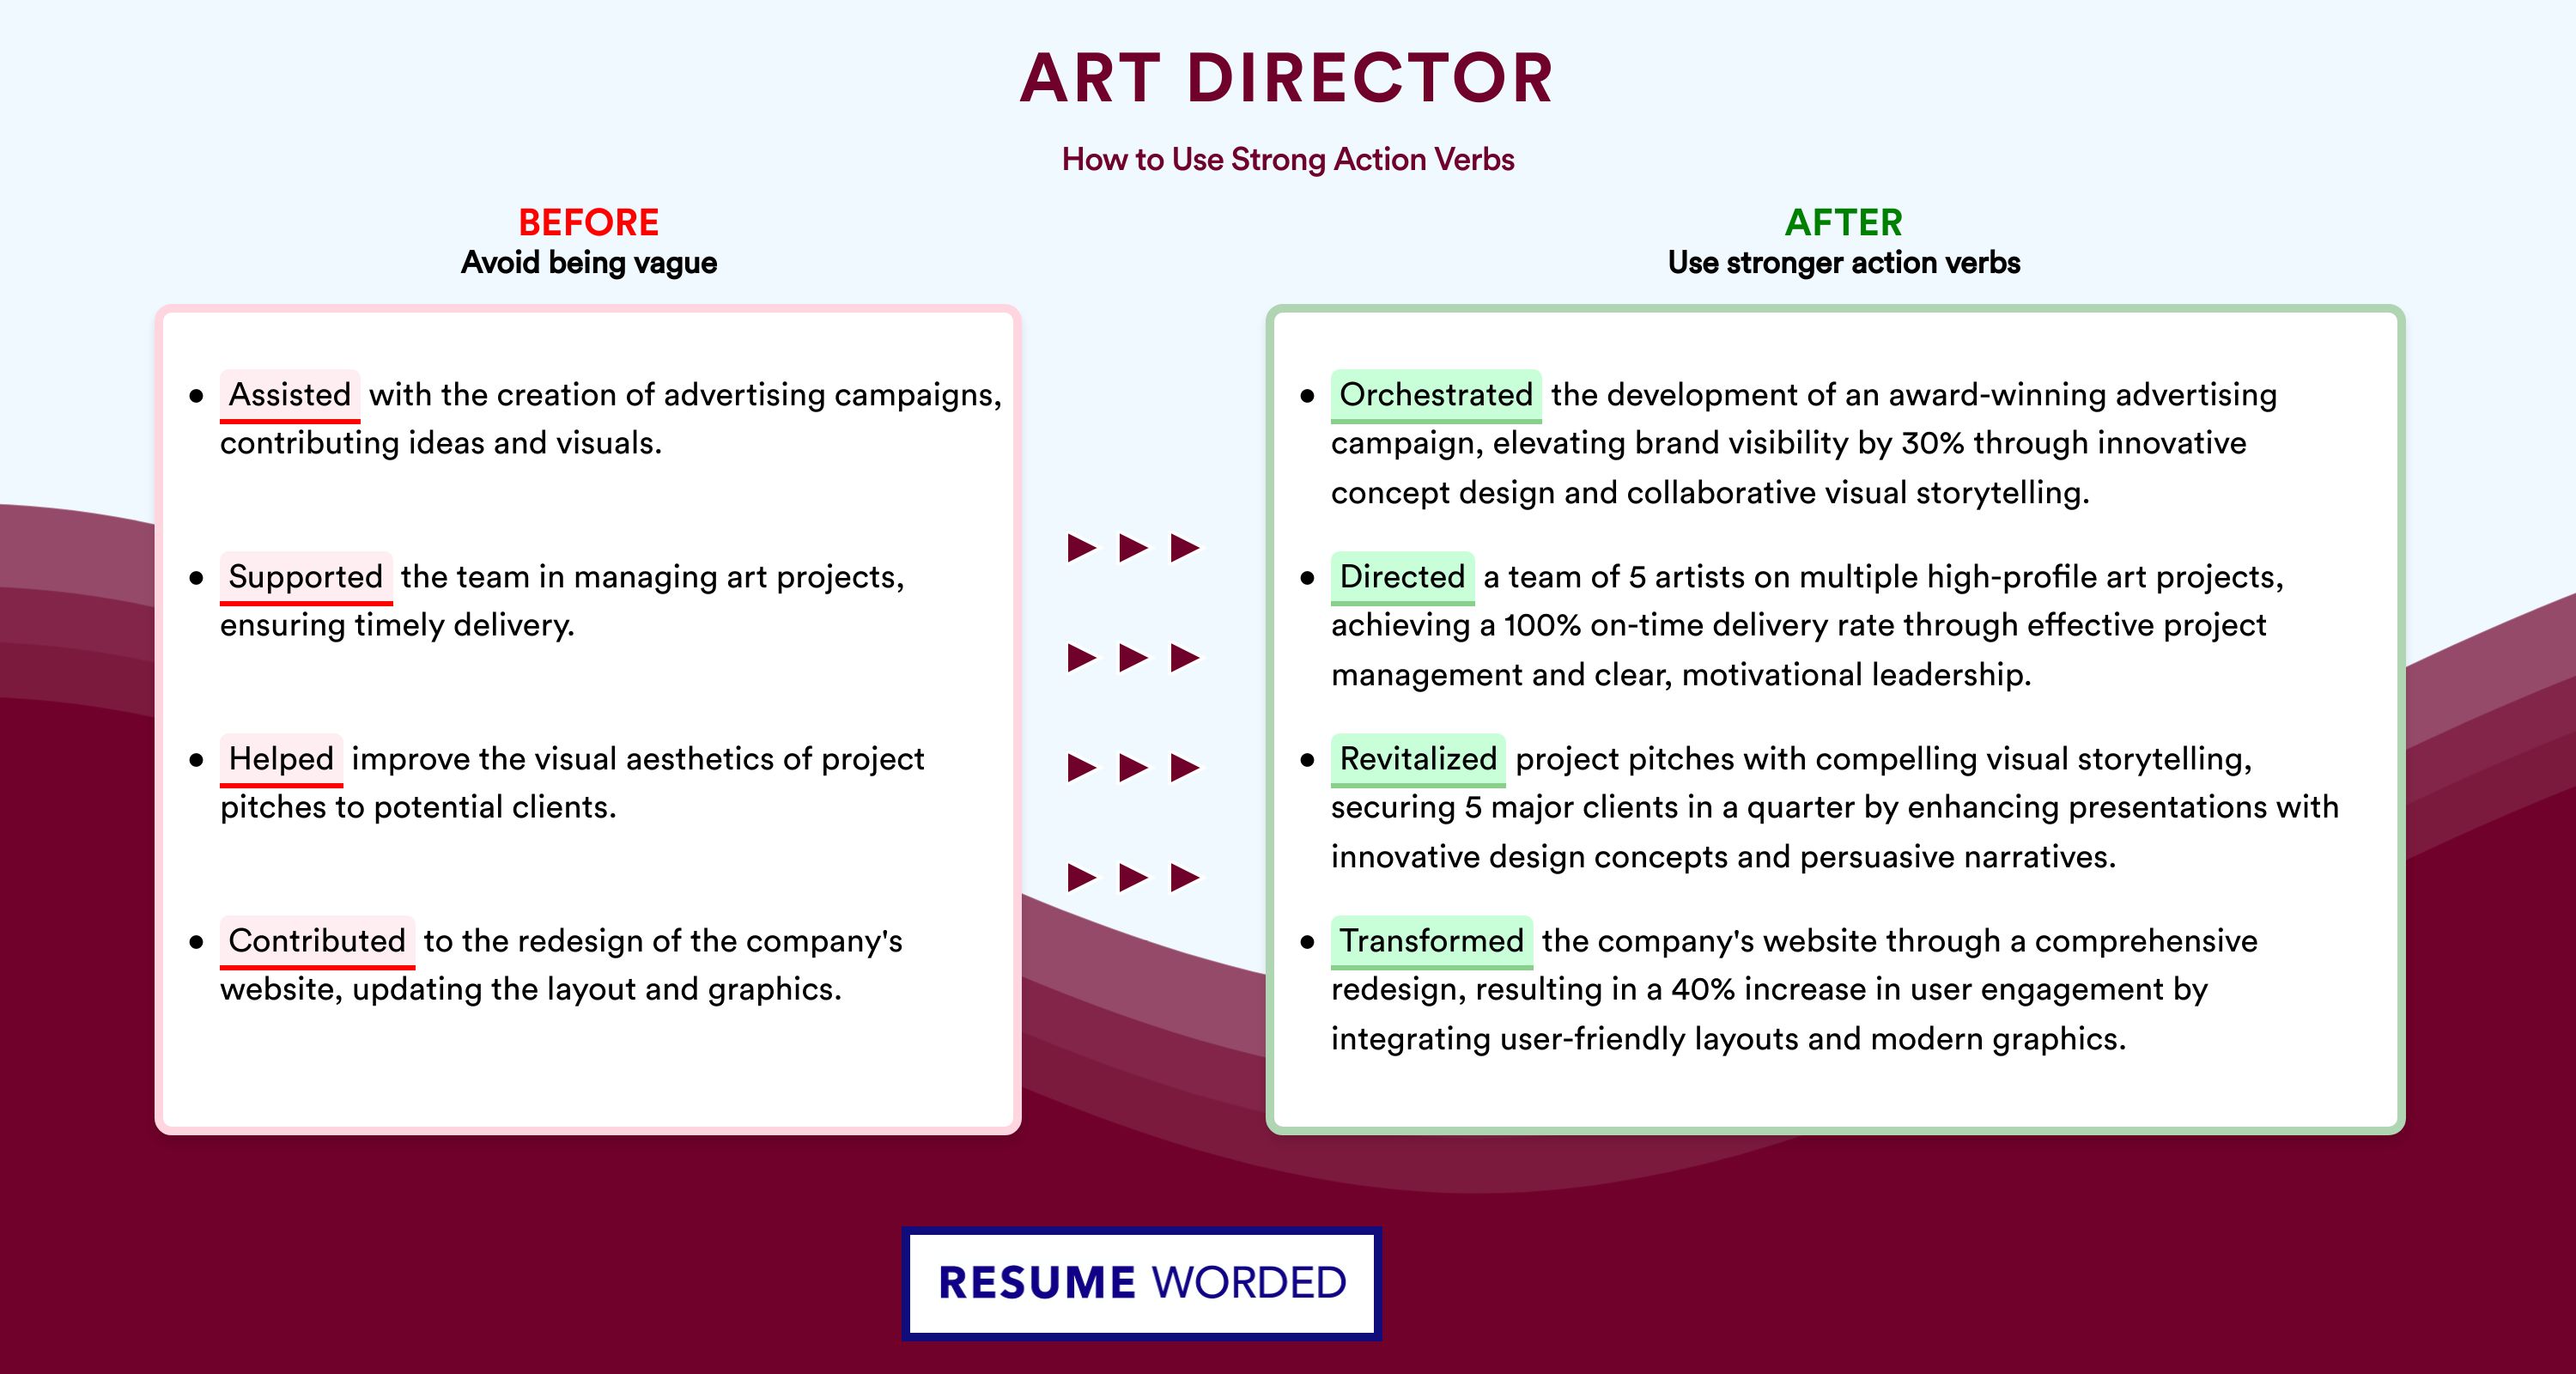 Action Verbs for Art Director